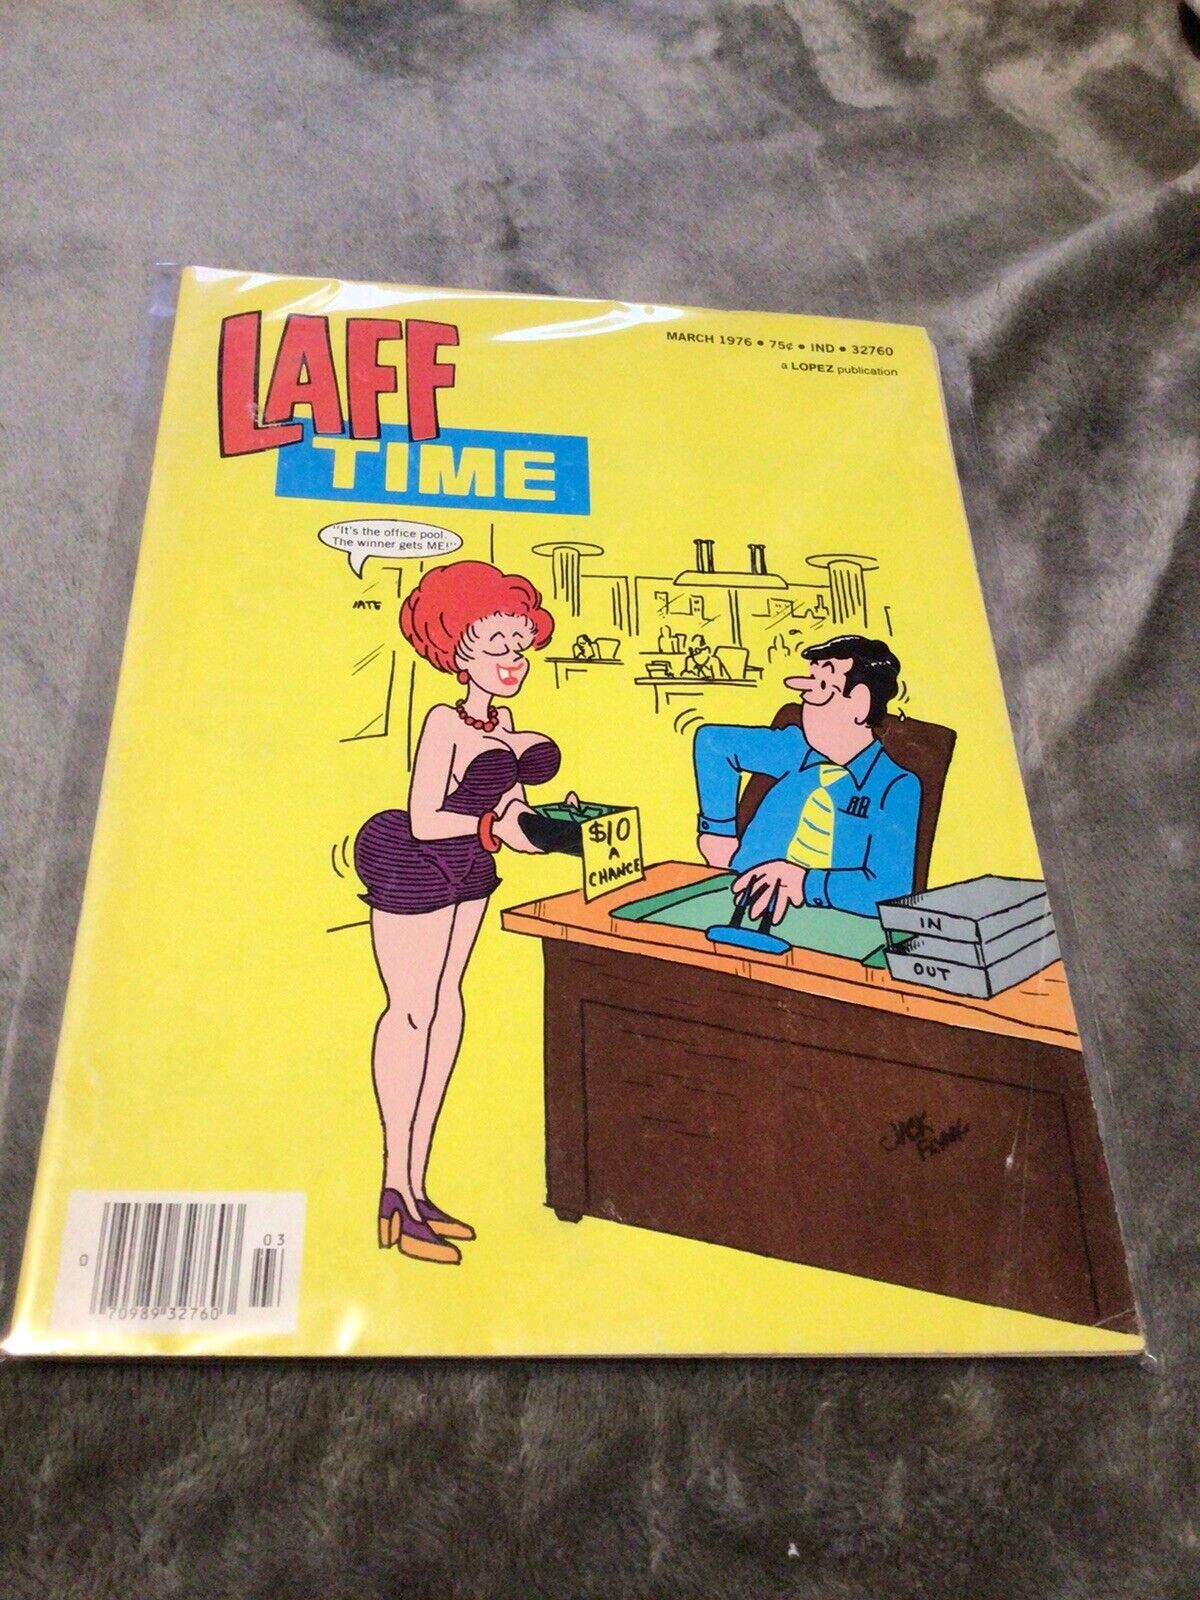 Vintage Laff Time Sexton Adult Humor Magazine Comic Book March 1976